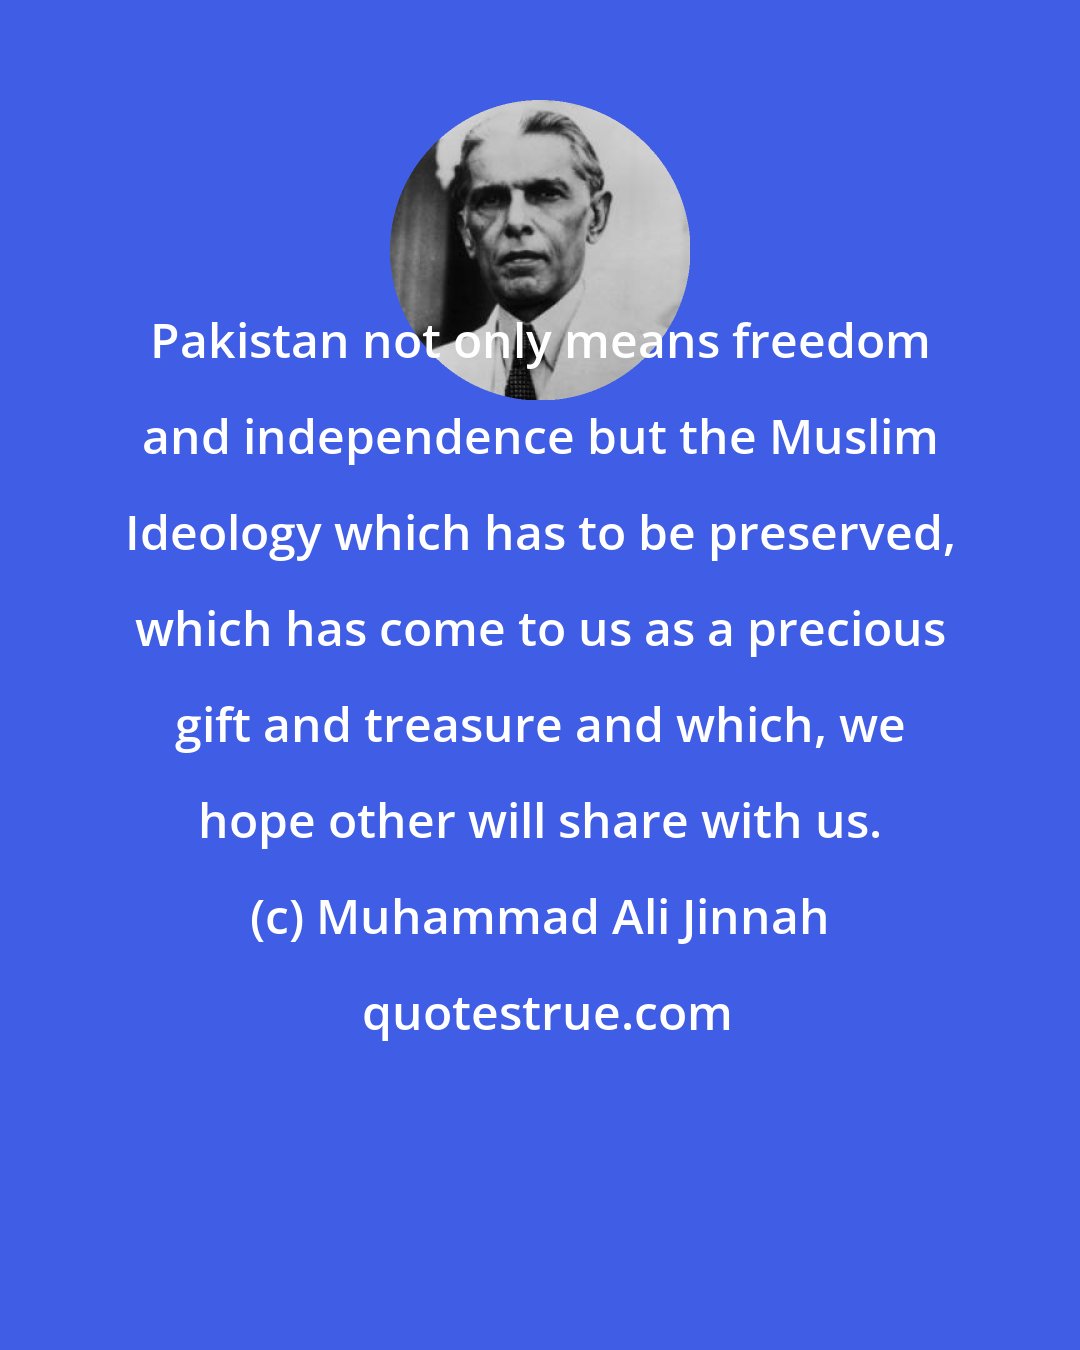 Muhammad Ali Jinnah: Pakistan not only means freedom and independence but the Muslim Ideology which has to be preserved, which has come to us as a precious gift and treasure and which, we hope other will share with us.